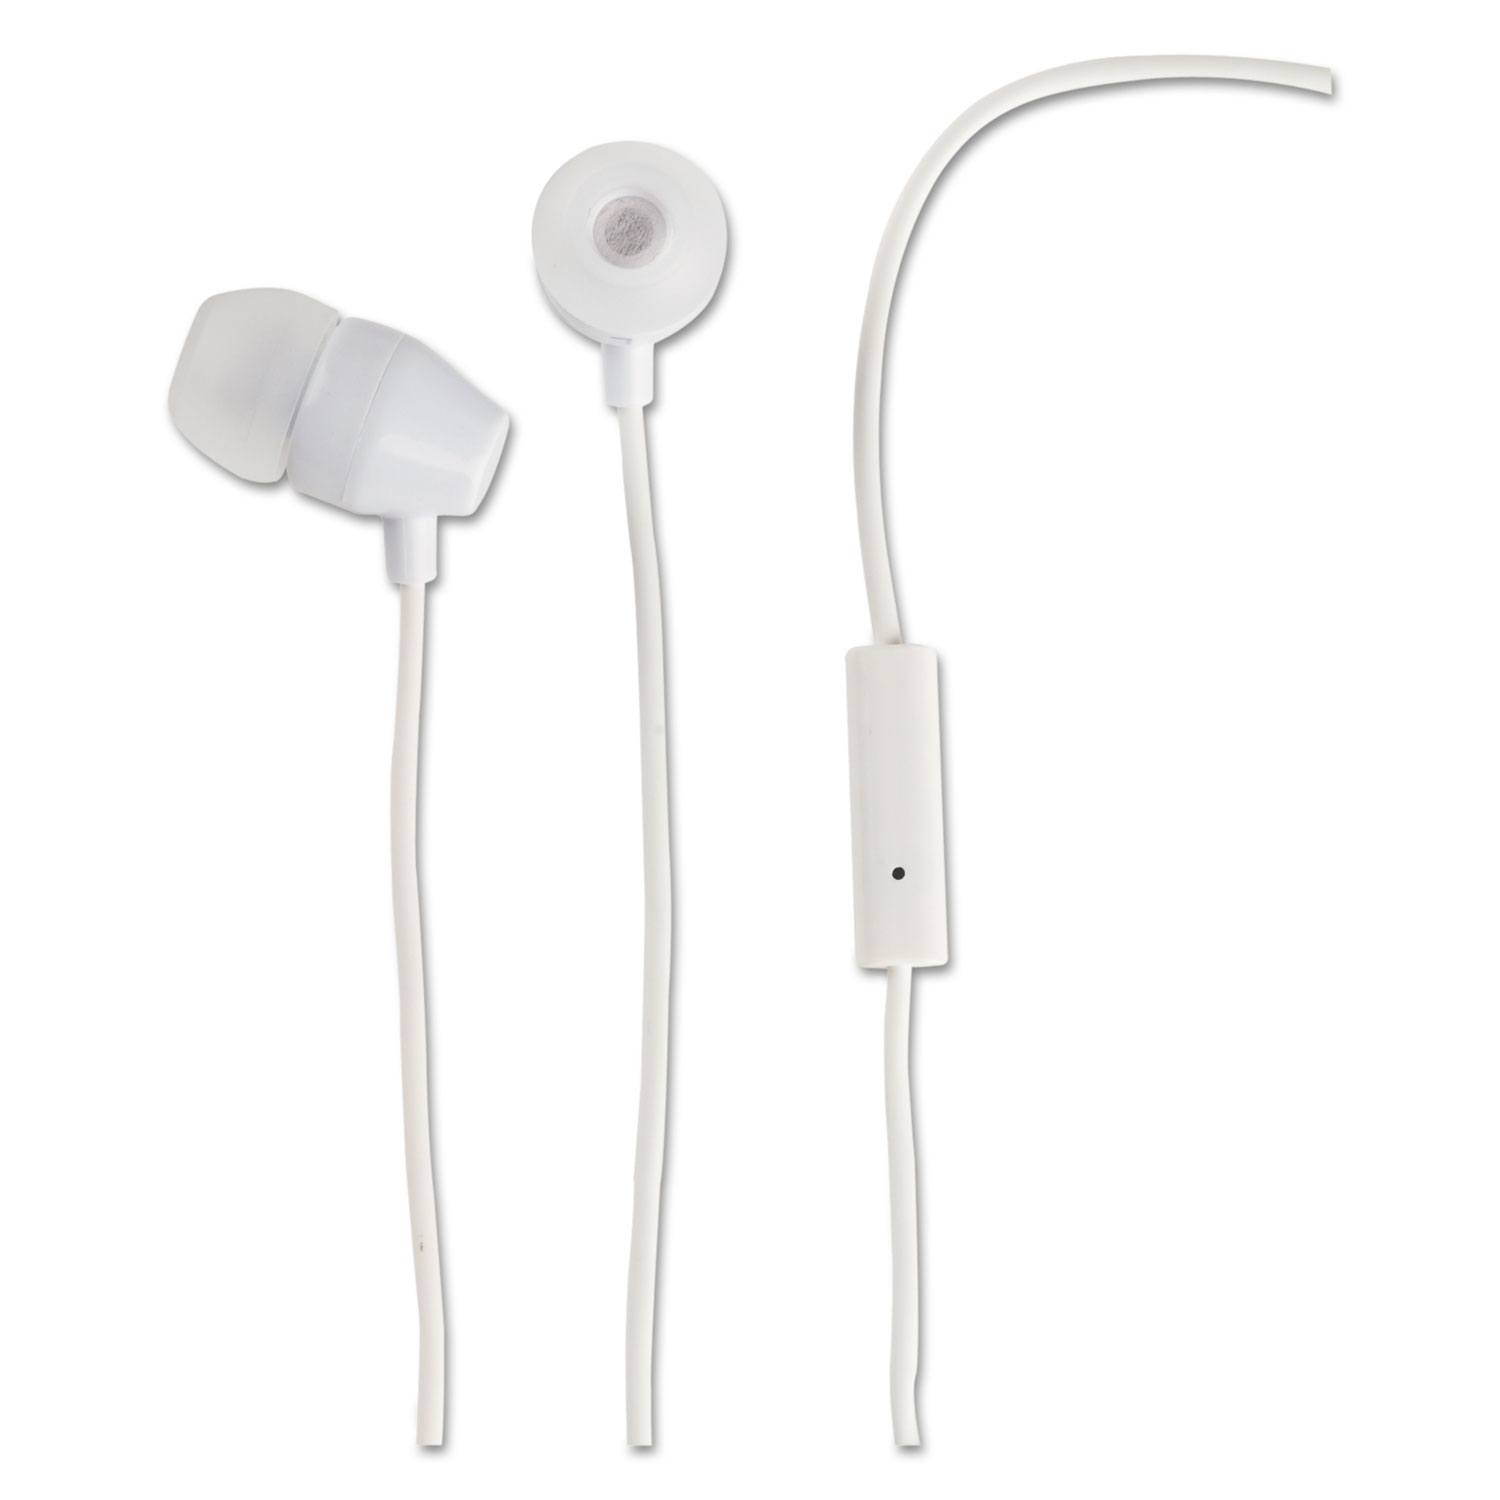  RCA HP159MICWHZ Noise Isolating Earbuds with In-line Microphone, White (VOXHP159MICWHZ) 